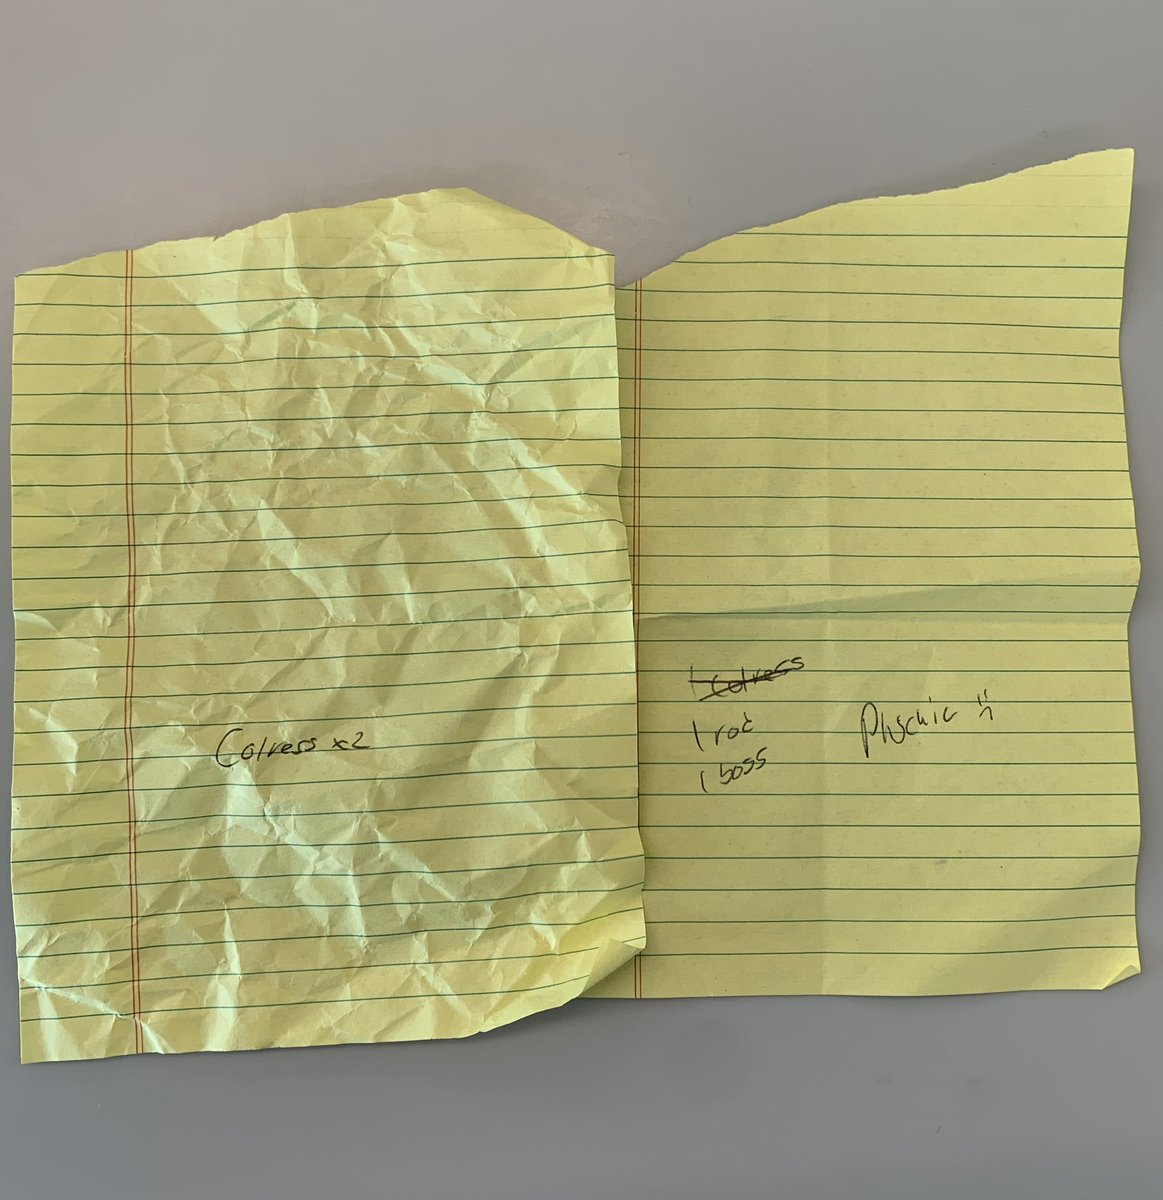 Allow me to share @BennyBillinger’s detailed notes playing Lost Box this weekend